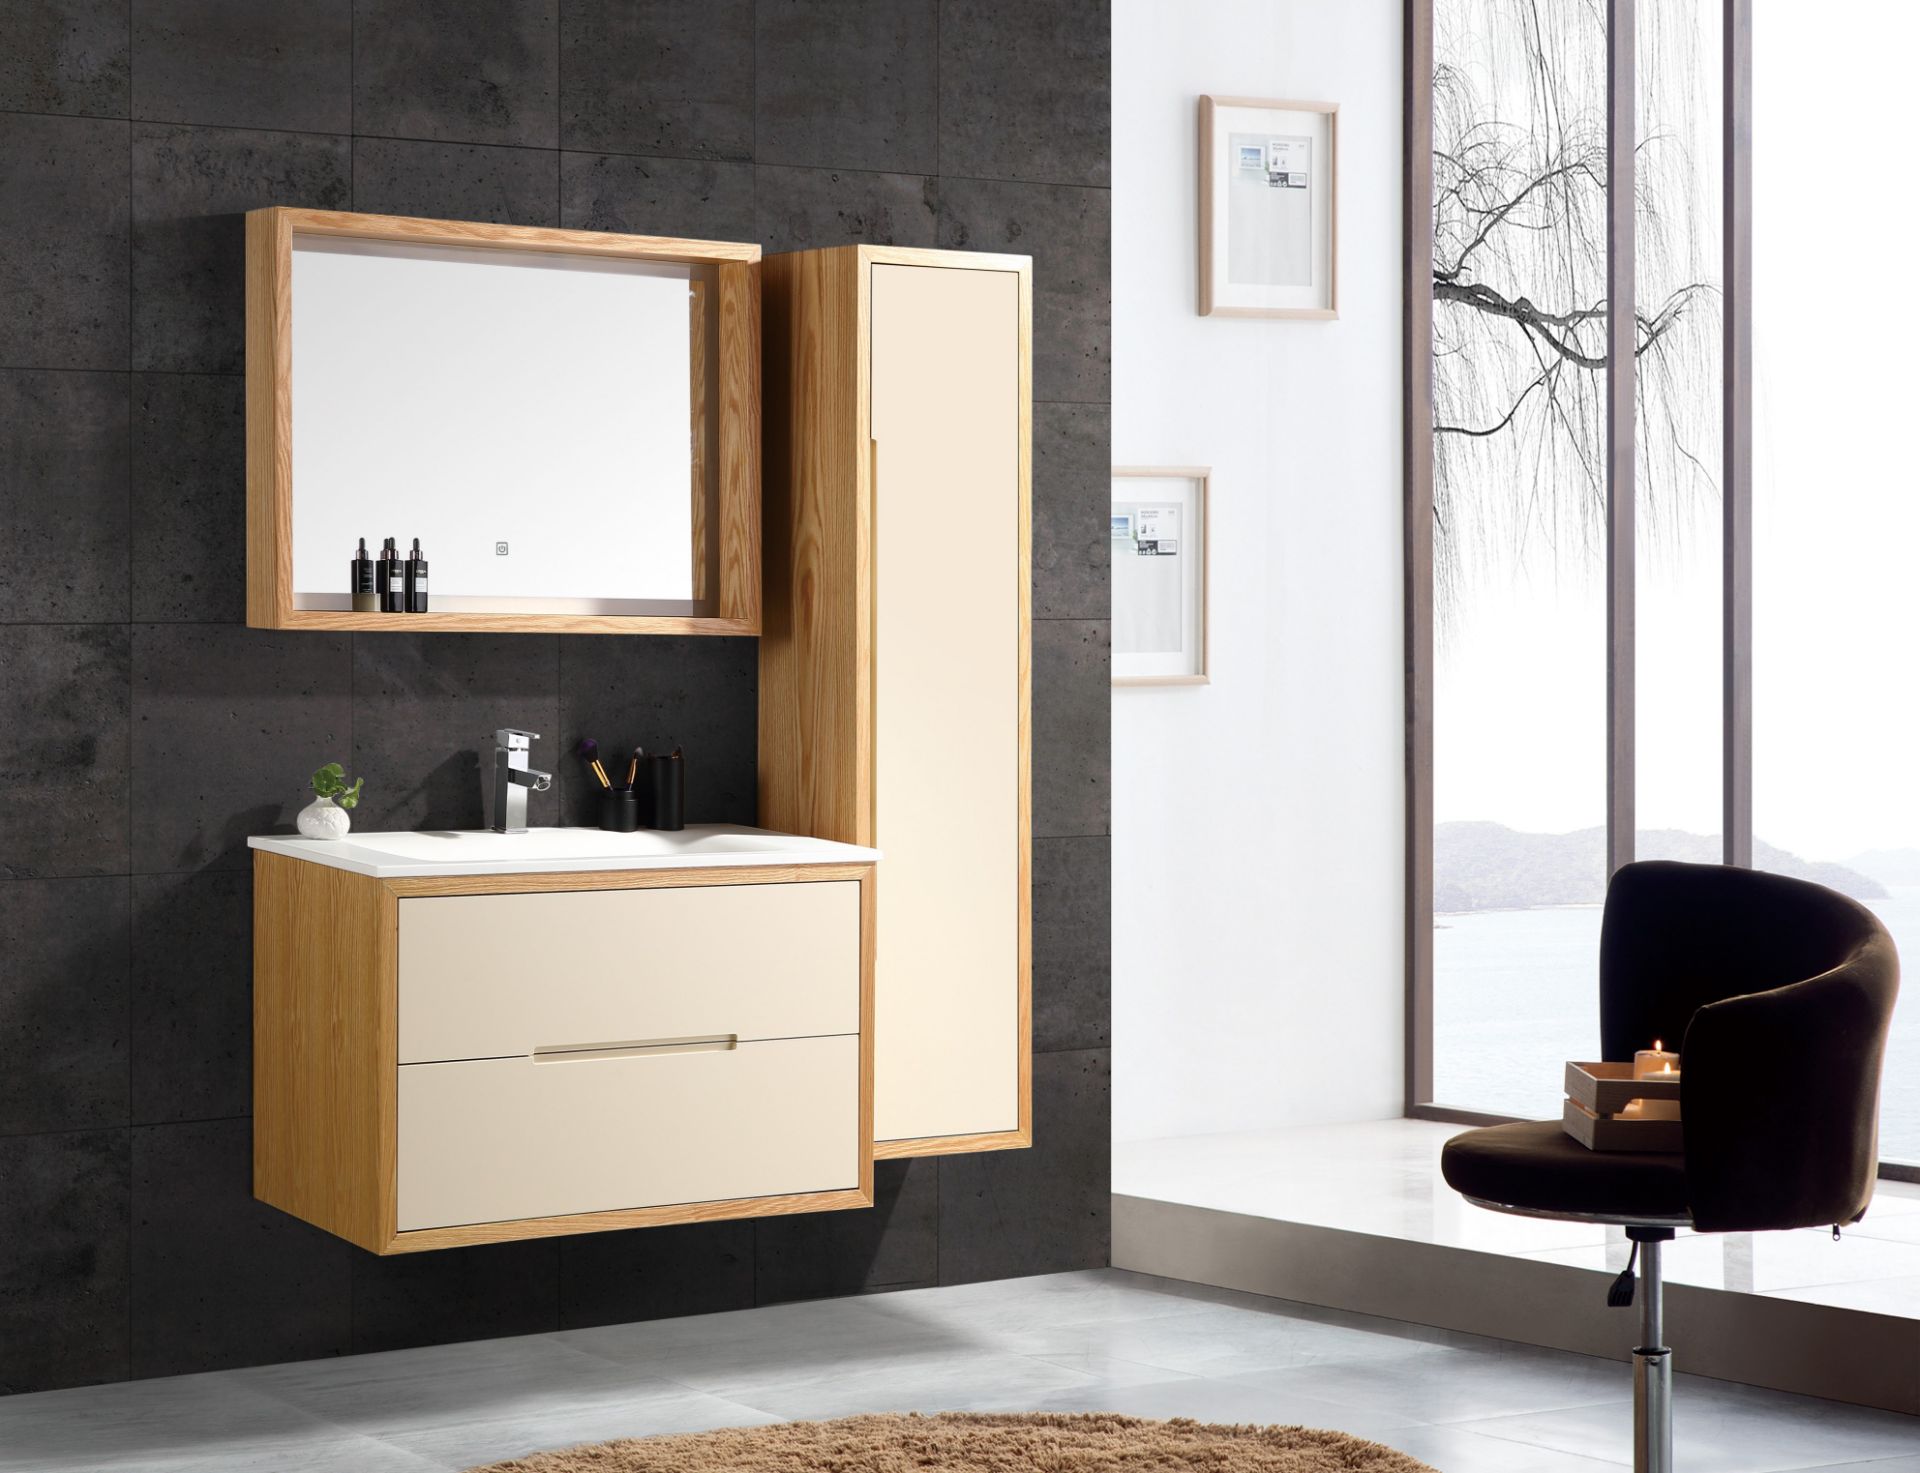 BRAND NEW 5 Sets of Complete Vanity Sets in Beige with fixtures and fittings RRP £3999.99 *NO VAT*